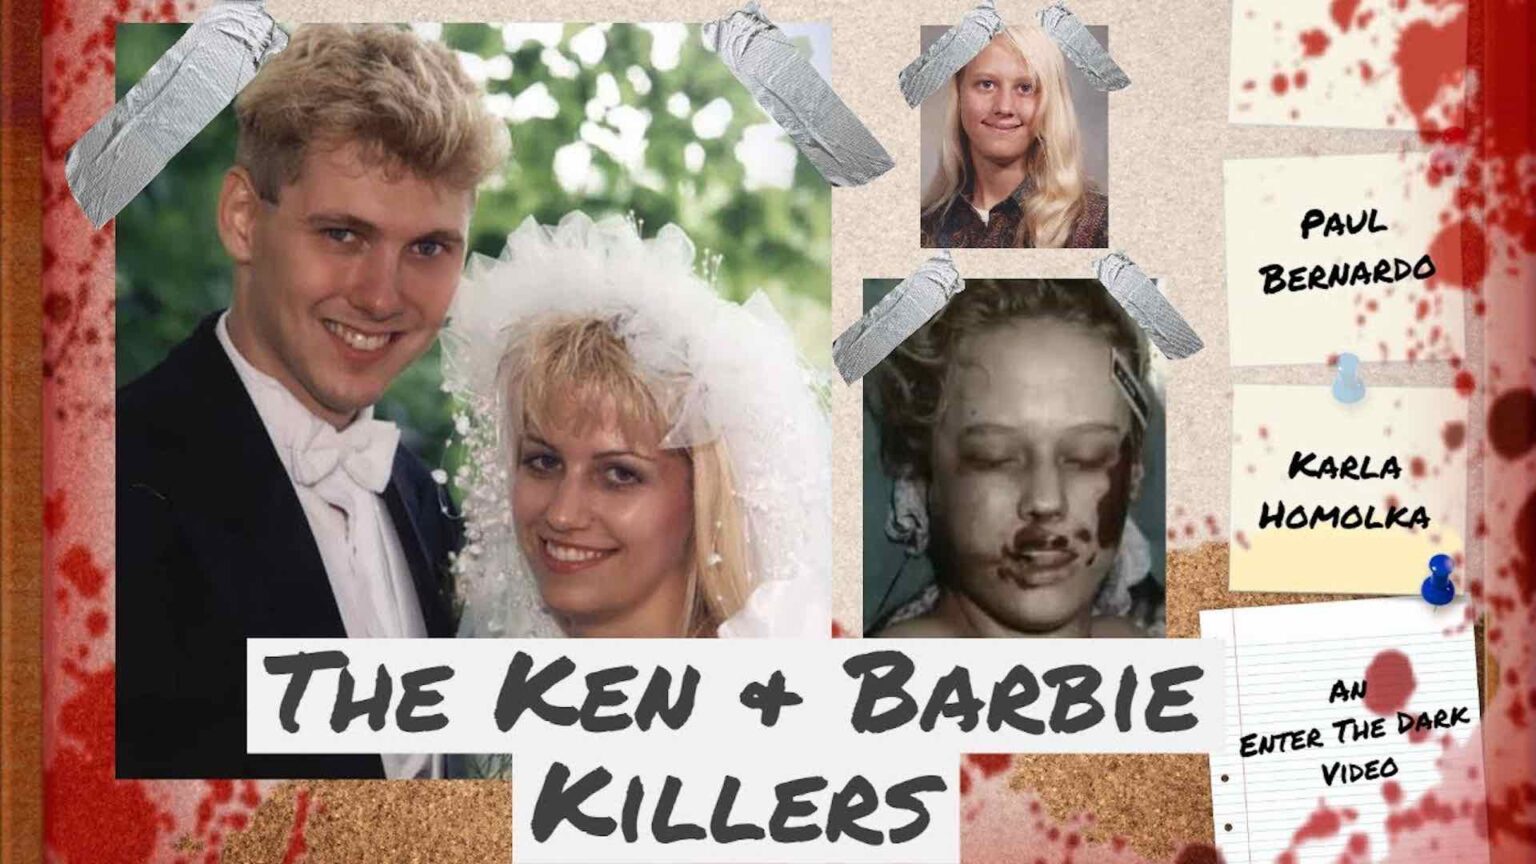 Karla Homolka & her husband, Paul Bernado, terrorized the Scarborough, Toronto community during the 80s & 90s. What are they up to now?